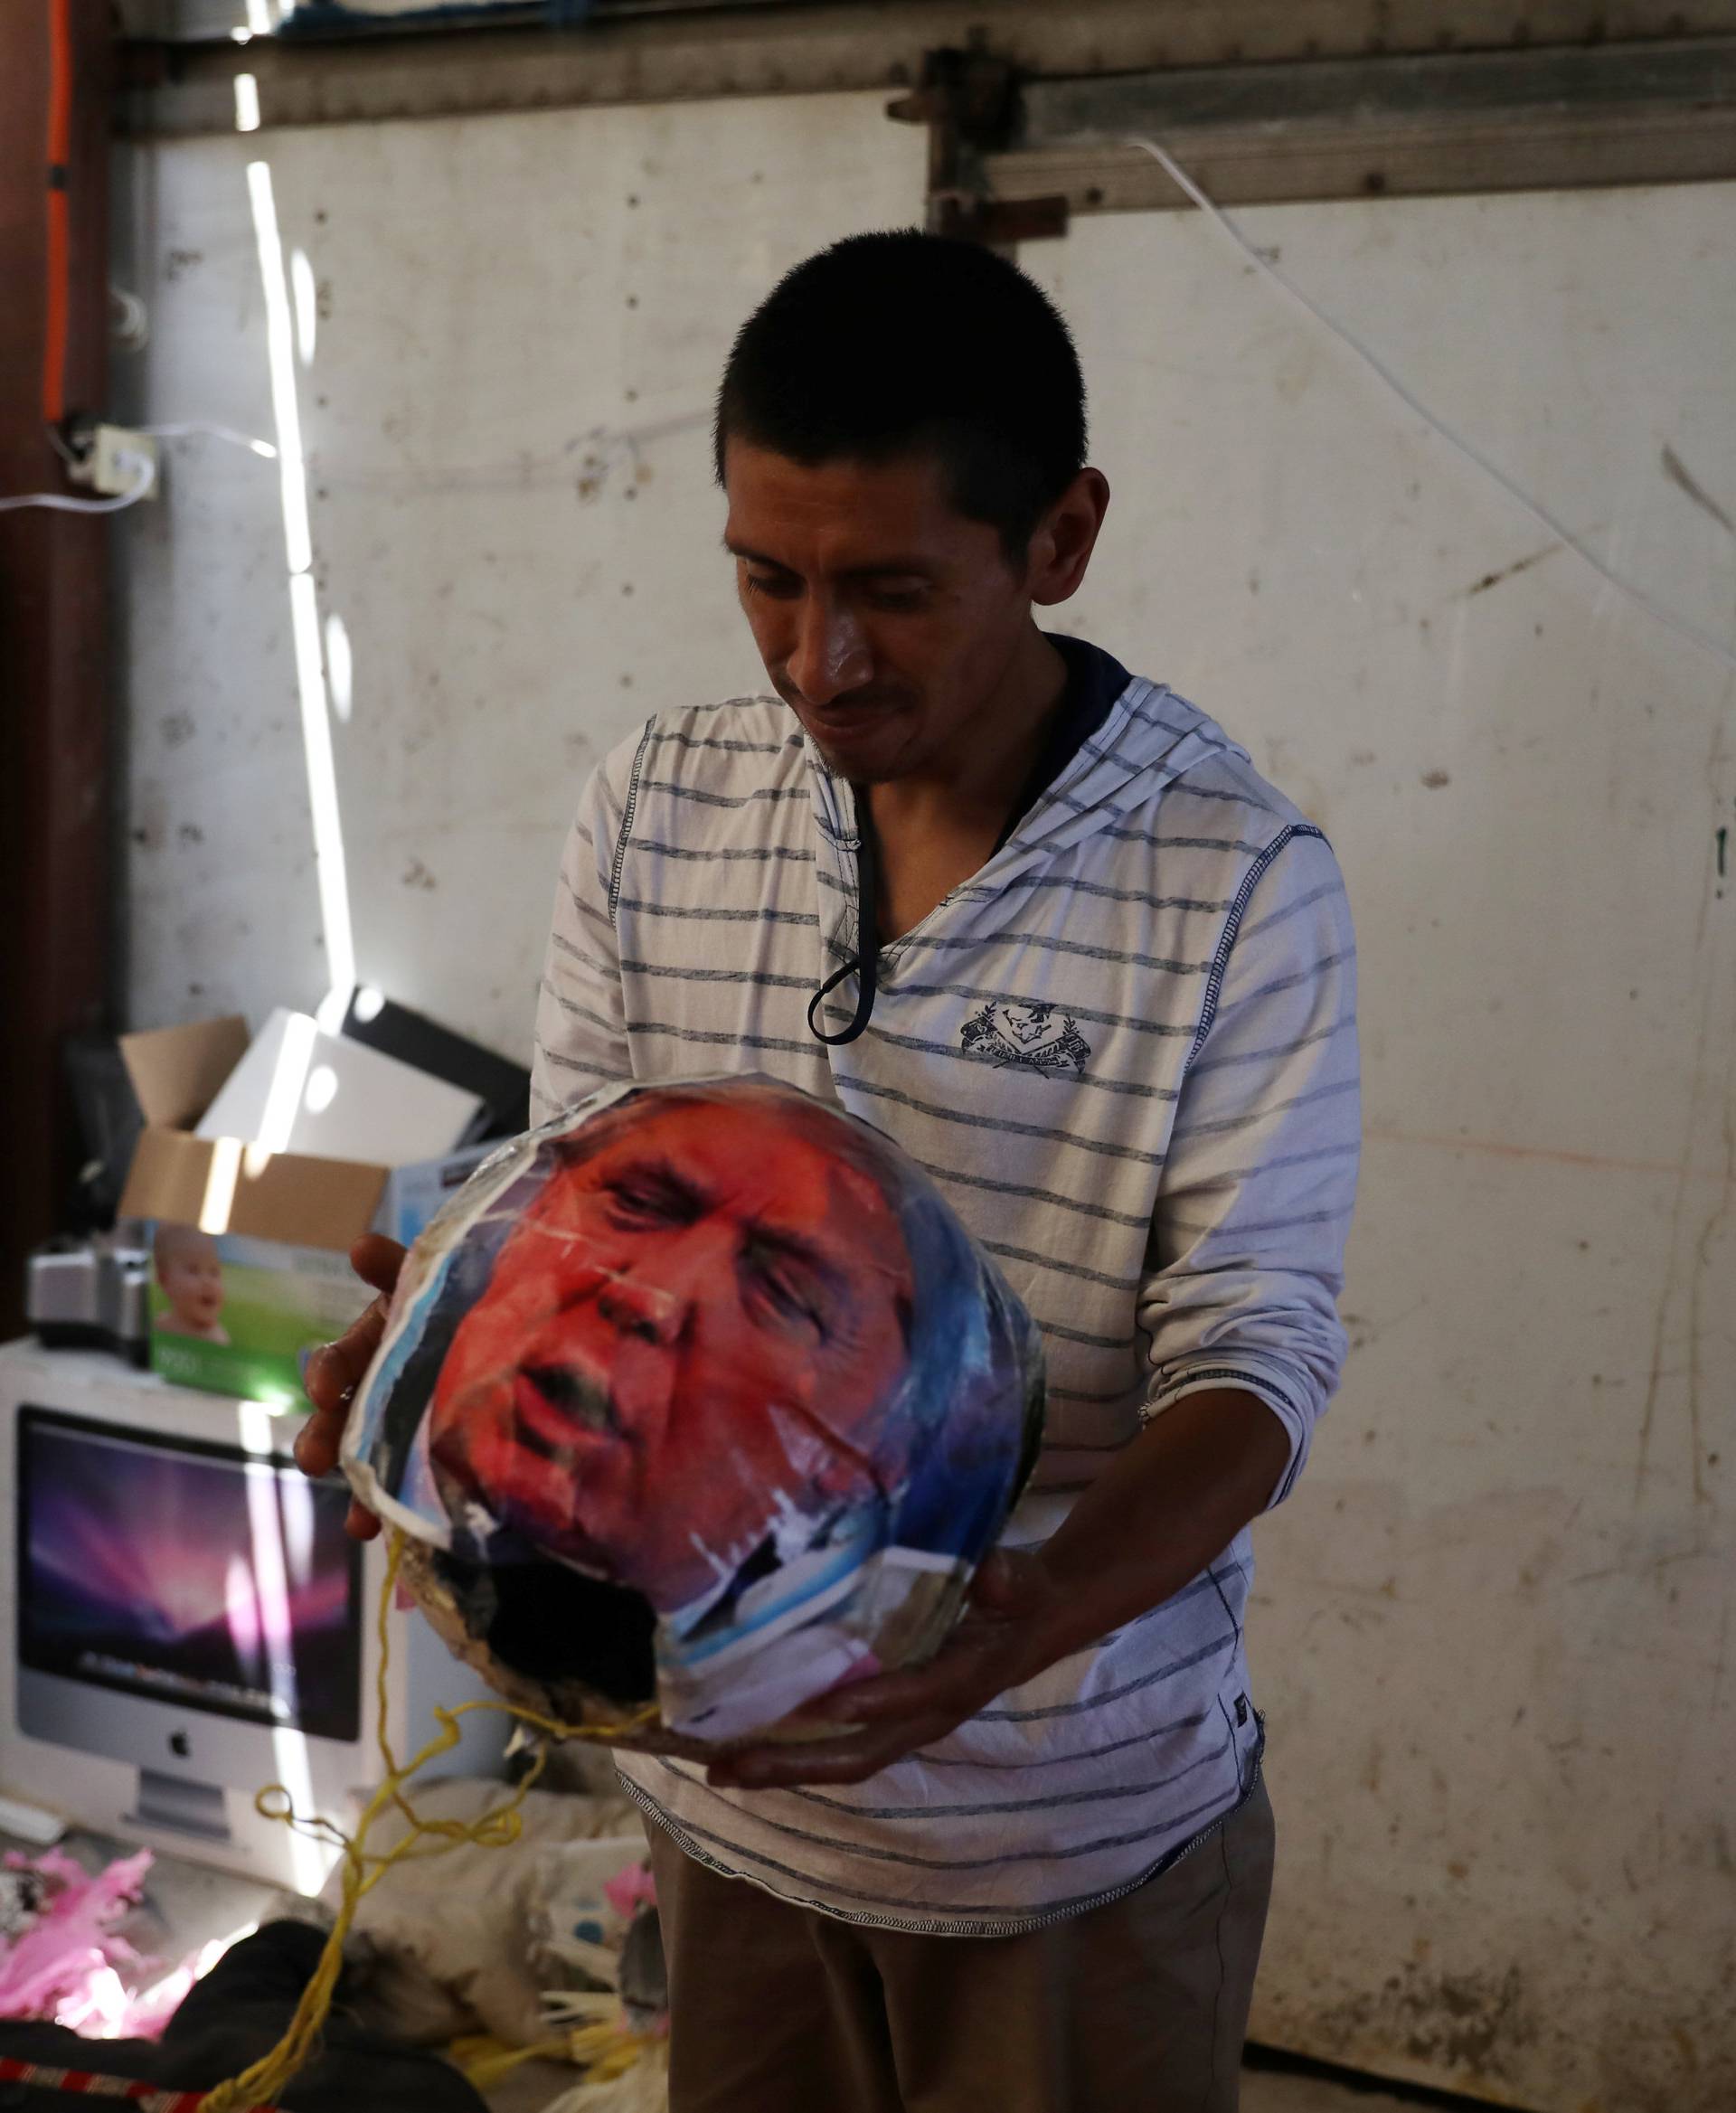 An activist makes the head of a puppet that mocks U.S. President Donald Trump at a migrant shelter in Tijuana